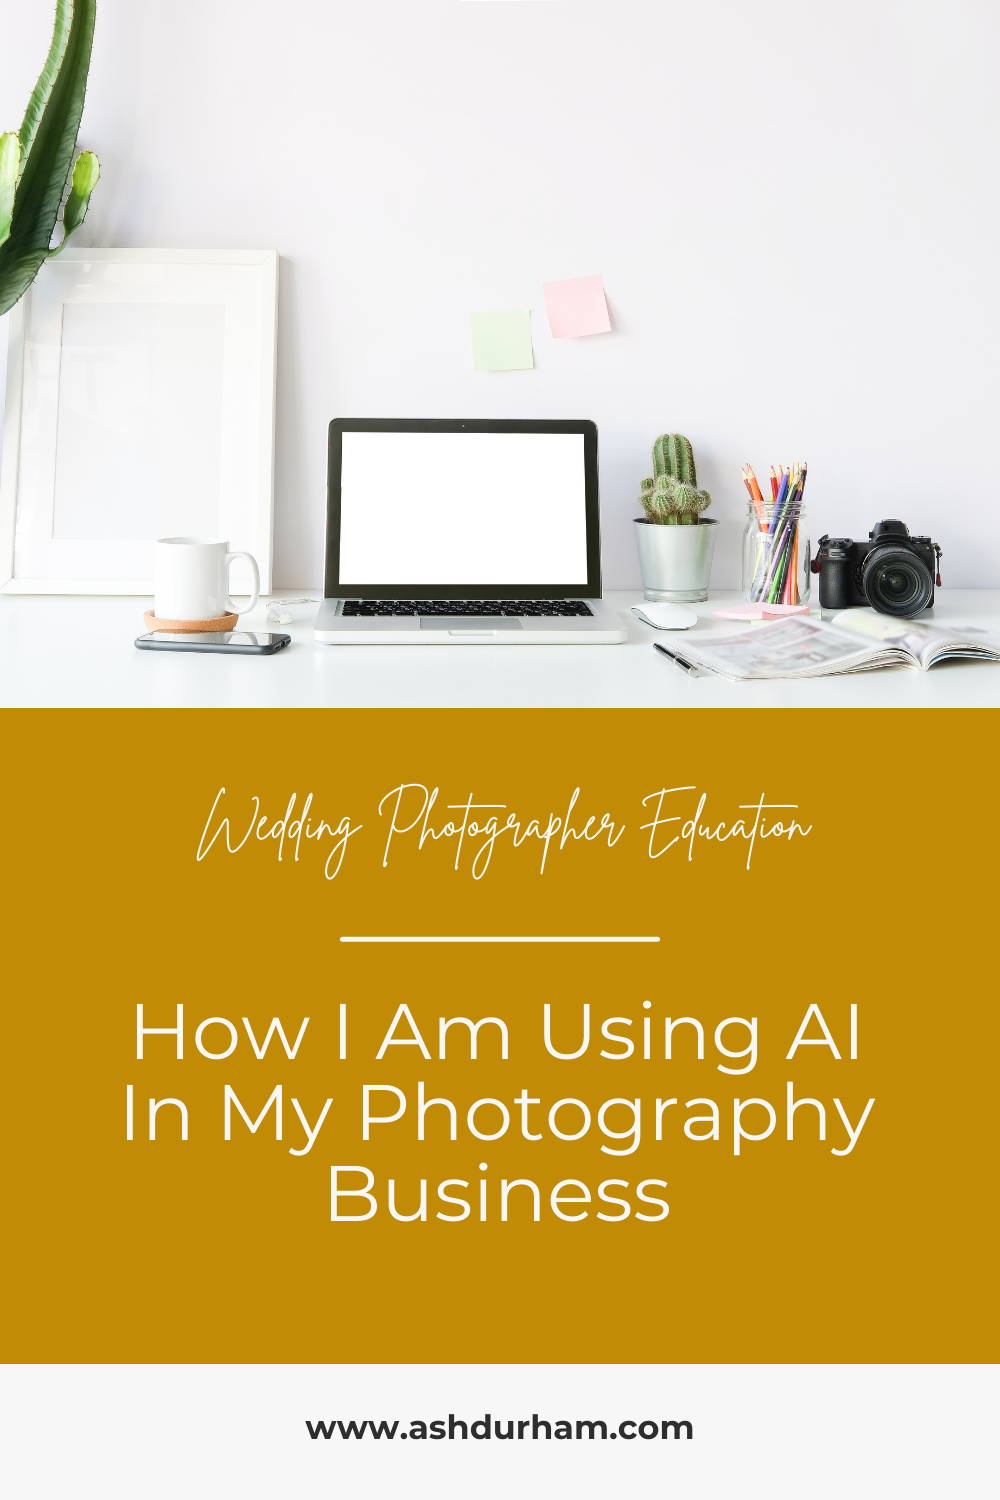 How I Am Using AI In My Photography Business